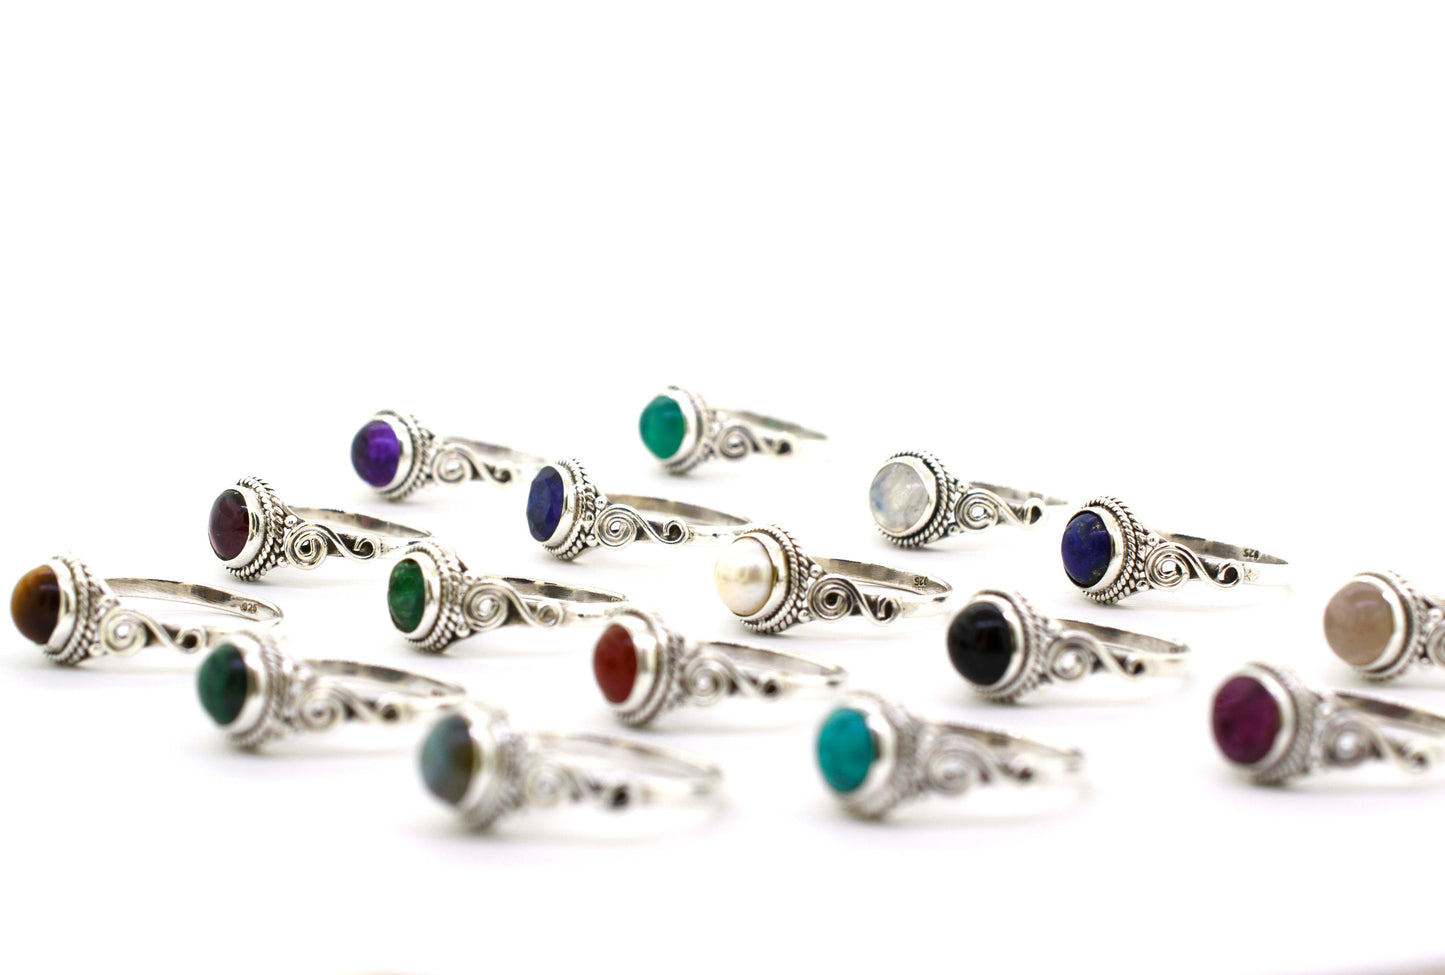 A group of Gemstone Circle Rings With Rope Border And Swirl Design, including cabochon stones.